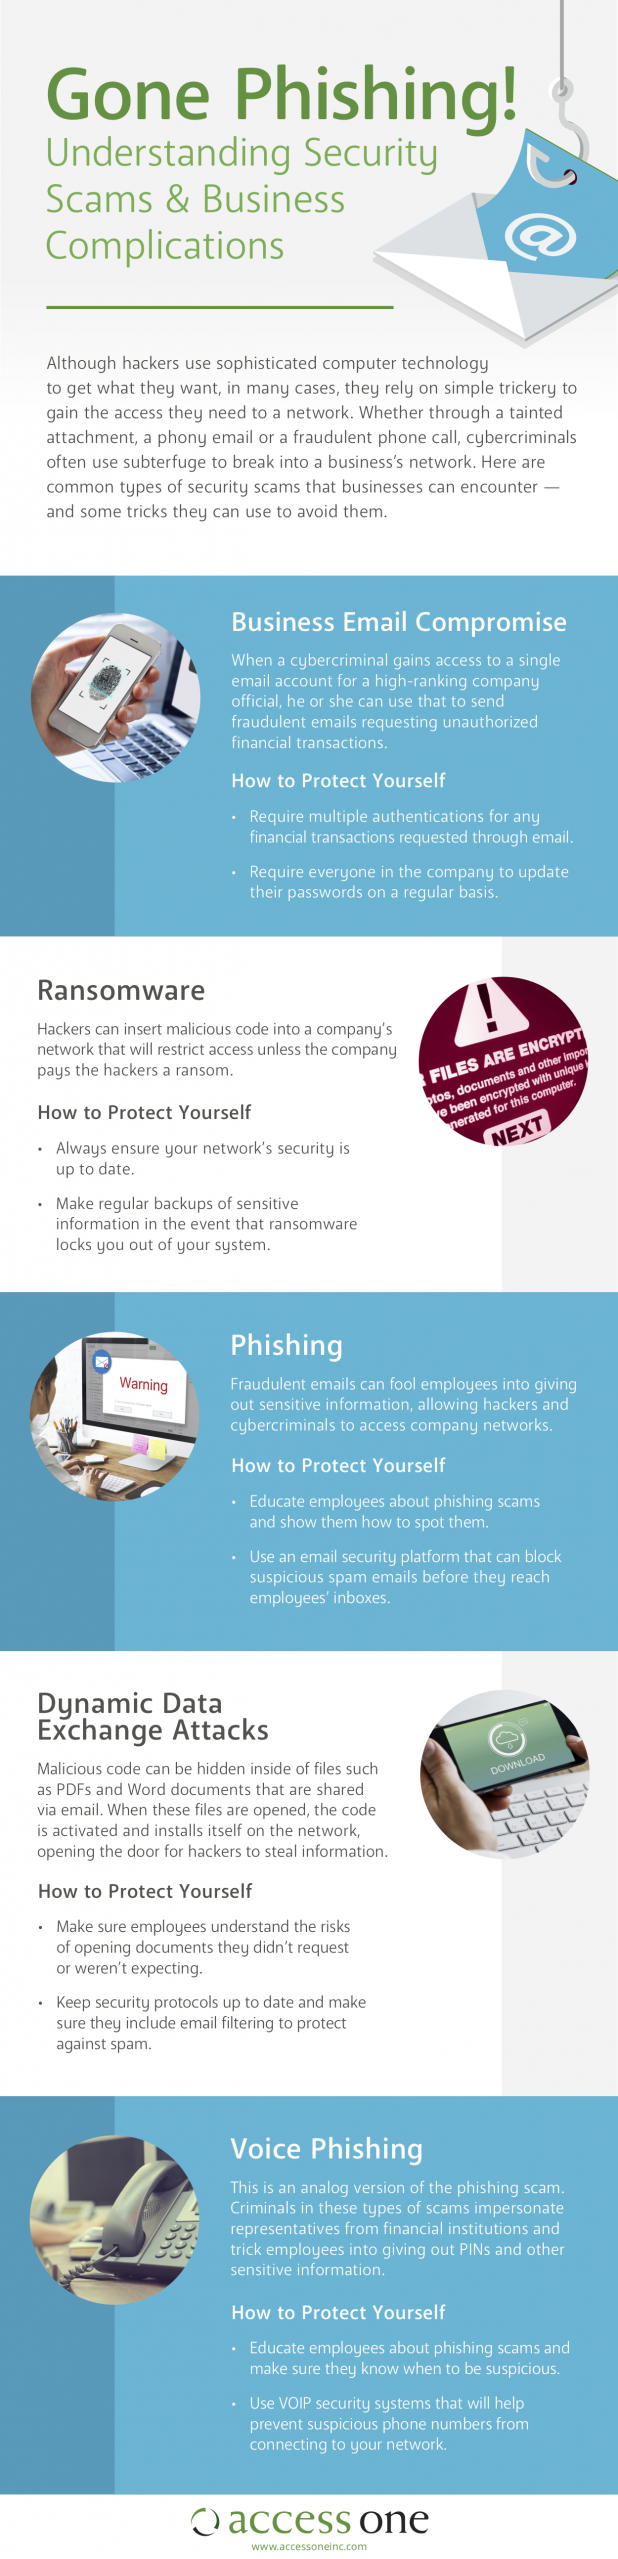 Can Cybersecurity Effectively Prevent Phishing Attacks? – CodeLifter